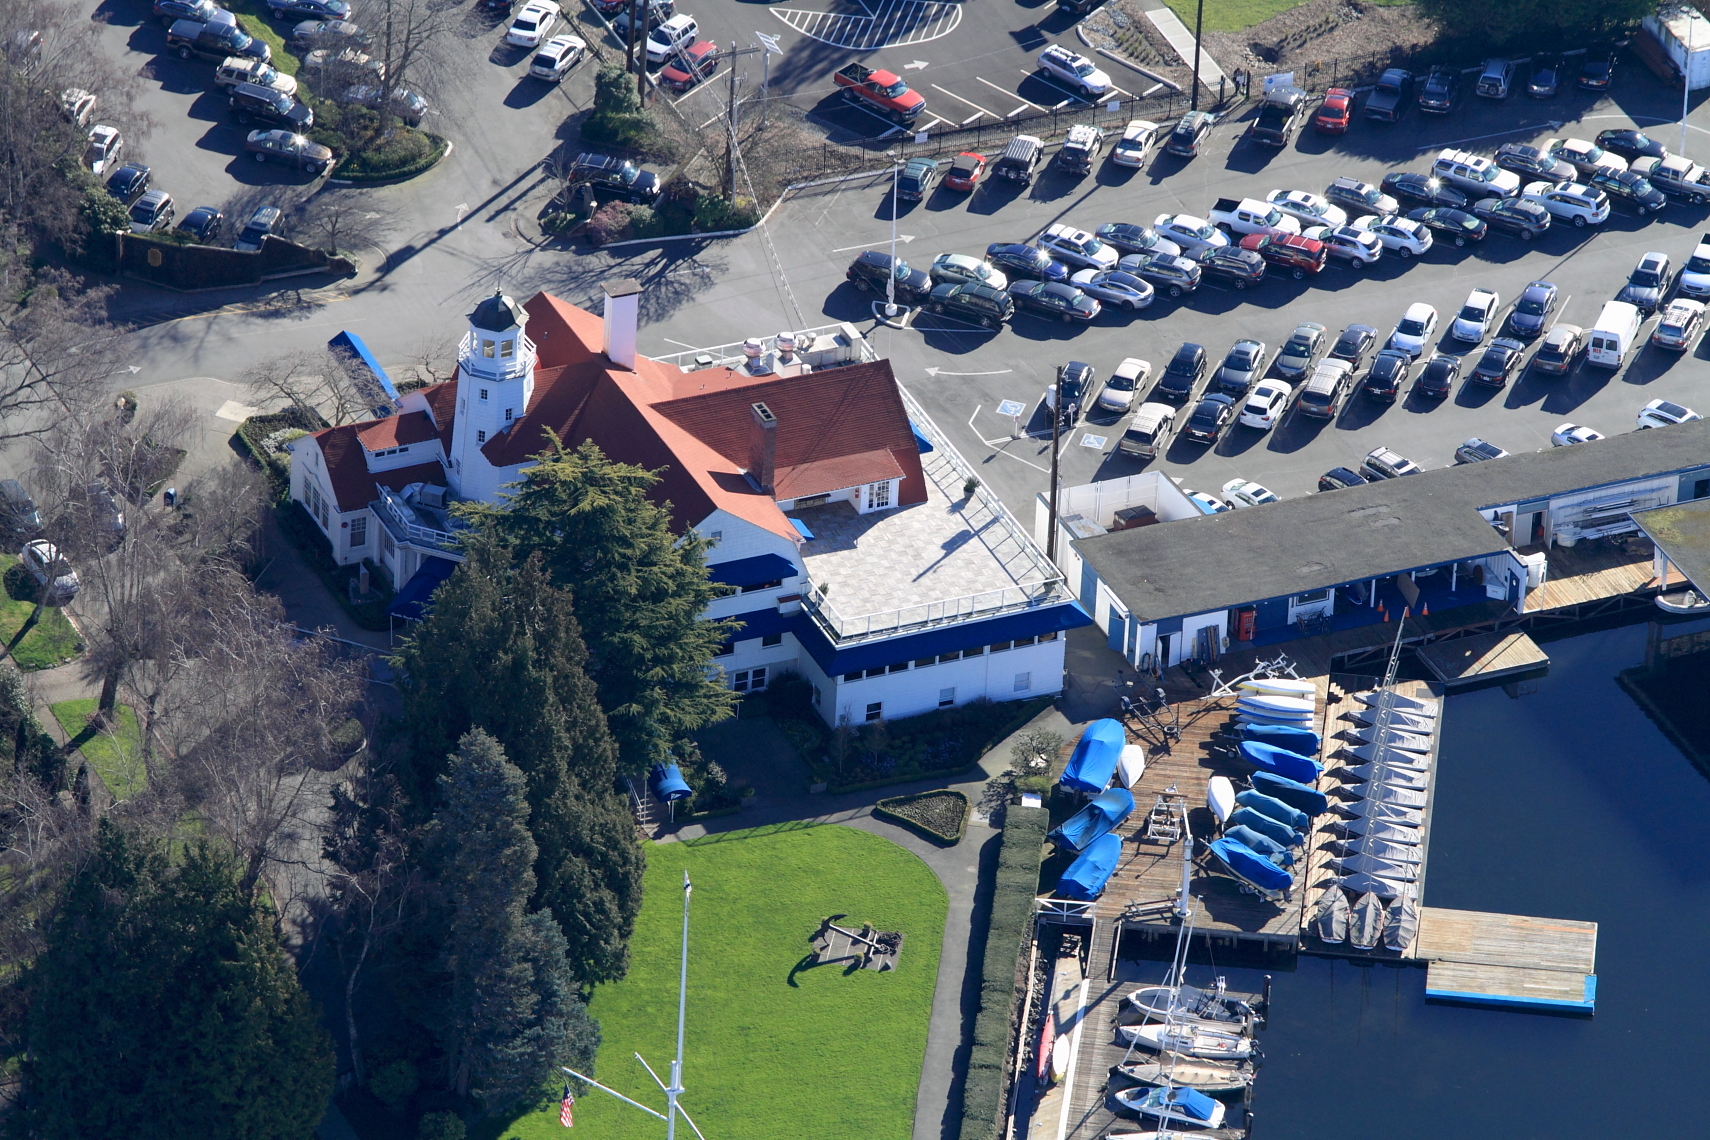 Aerial view of Malarkey shingle roof on a Yacht club in Seattle.